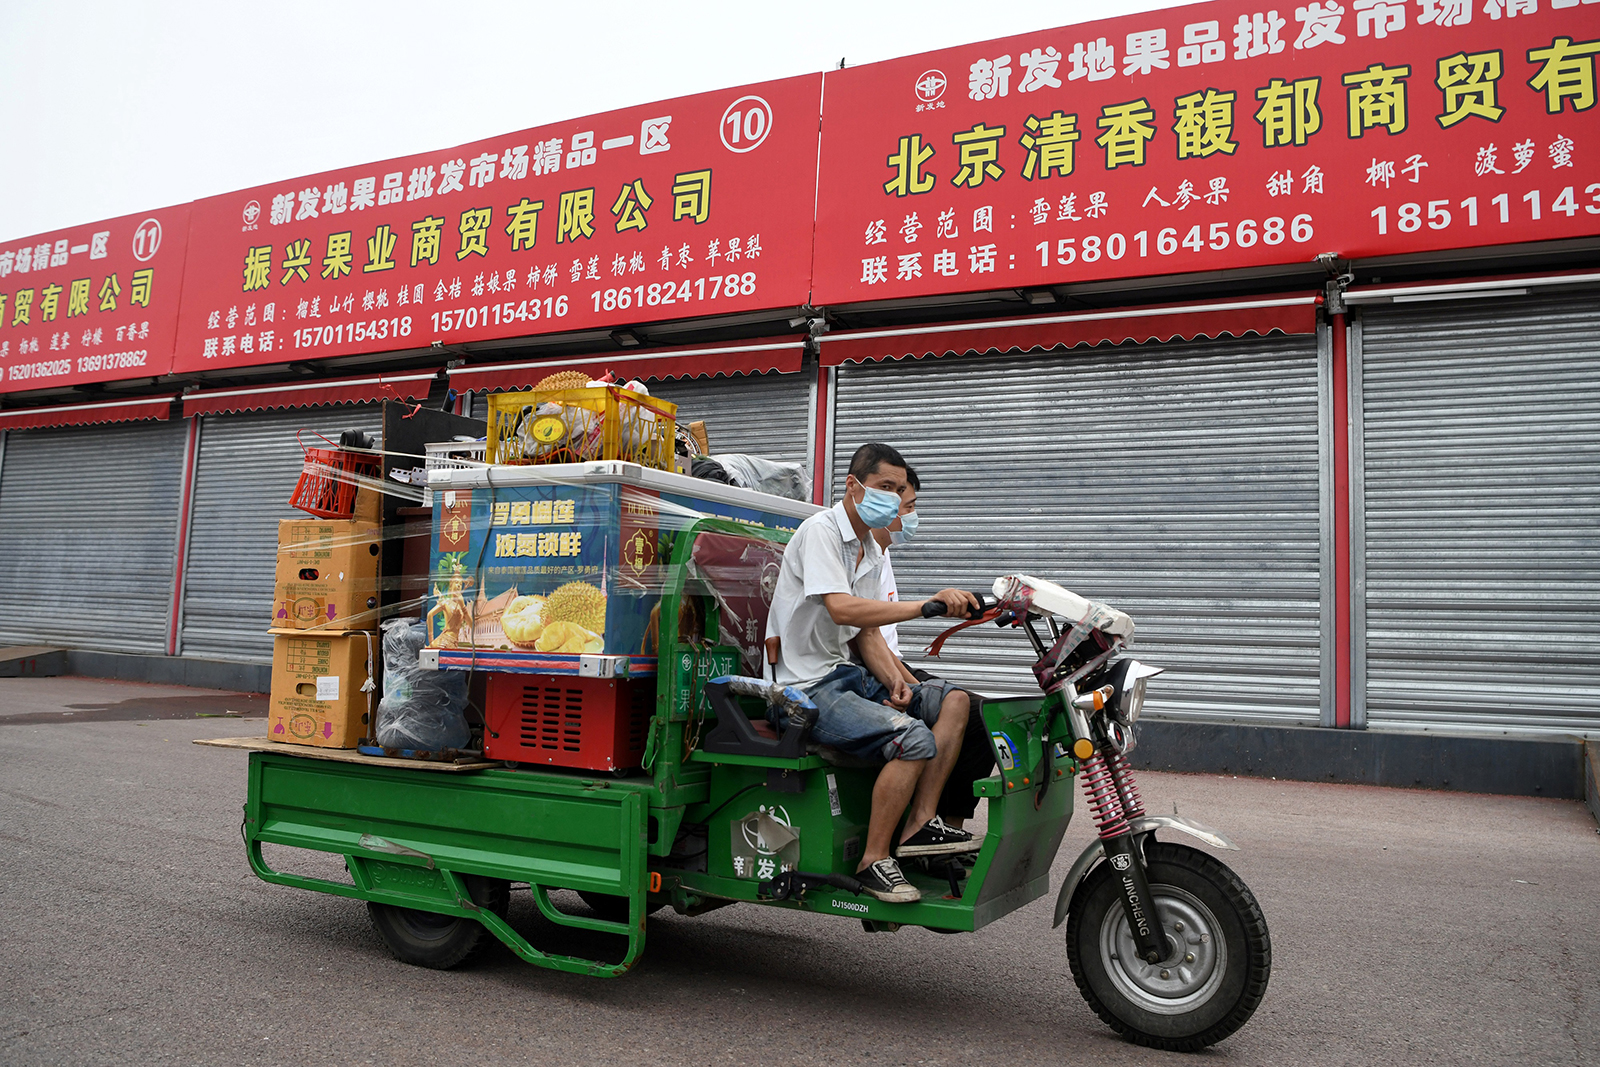 Workers drive a motorized tricycle carrying merchandise at the Xinfadi wholesale market in Beijing on August 5.